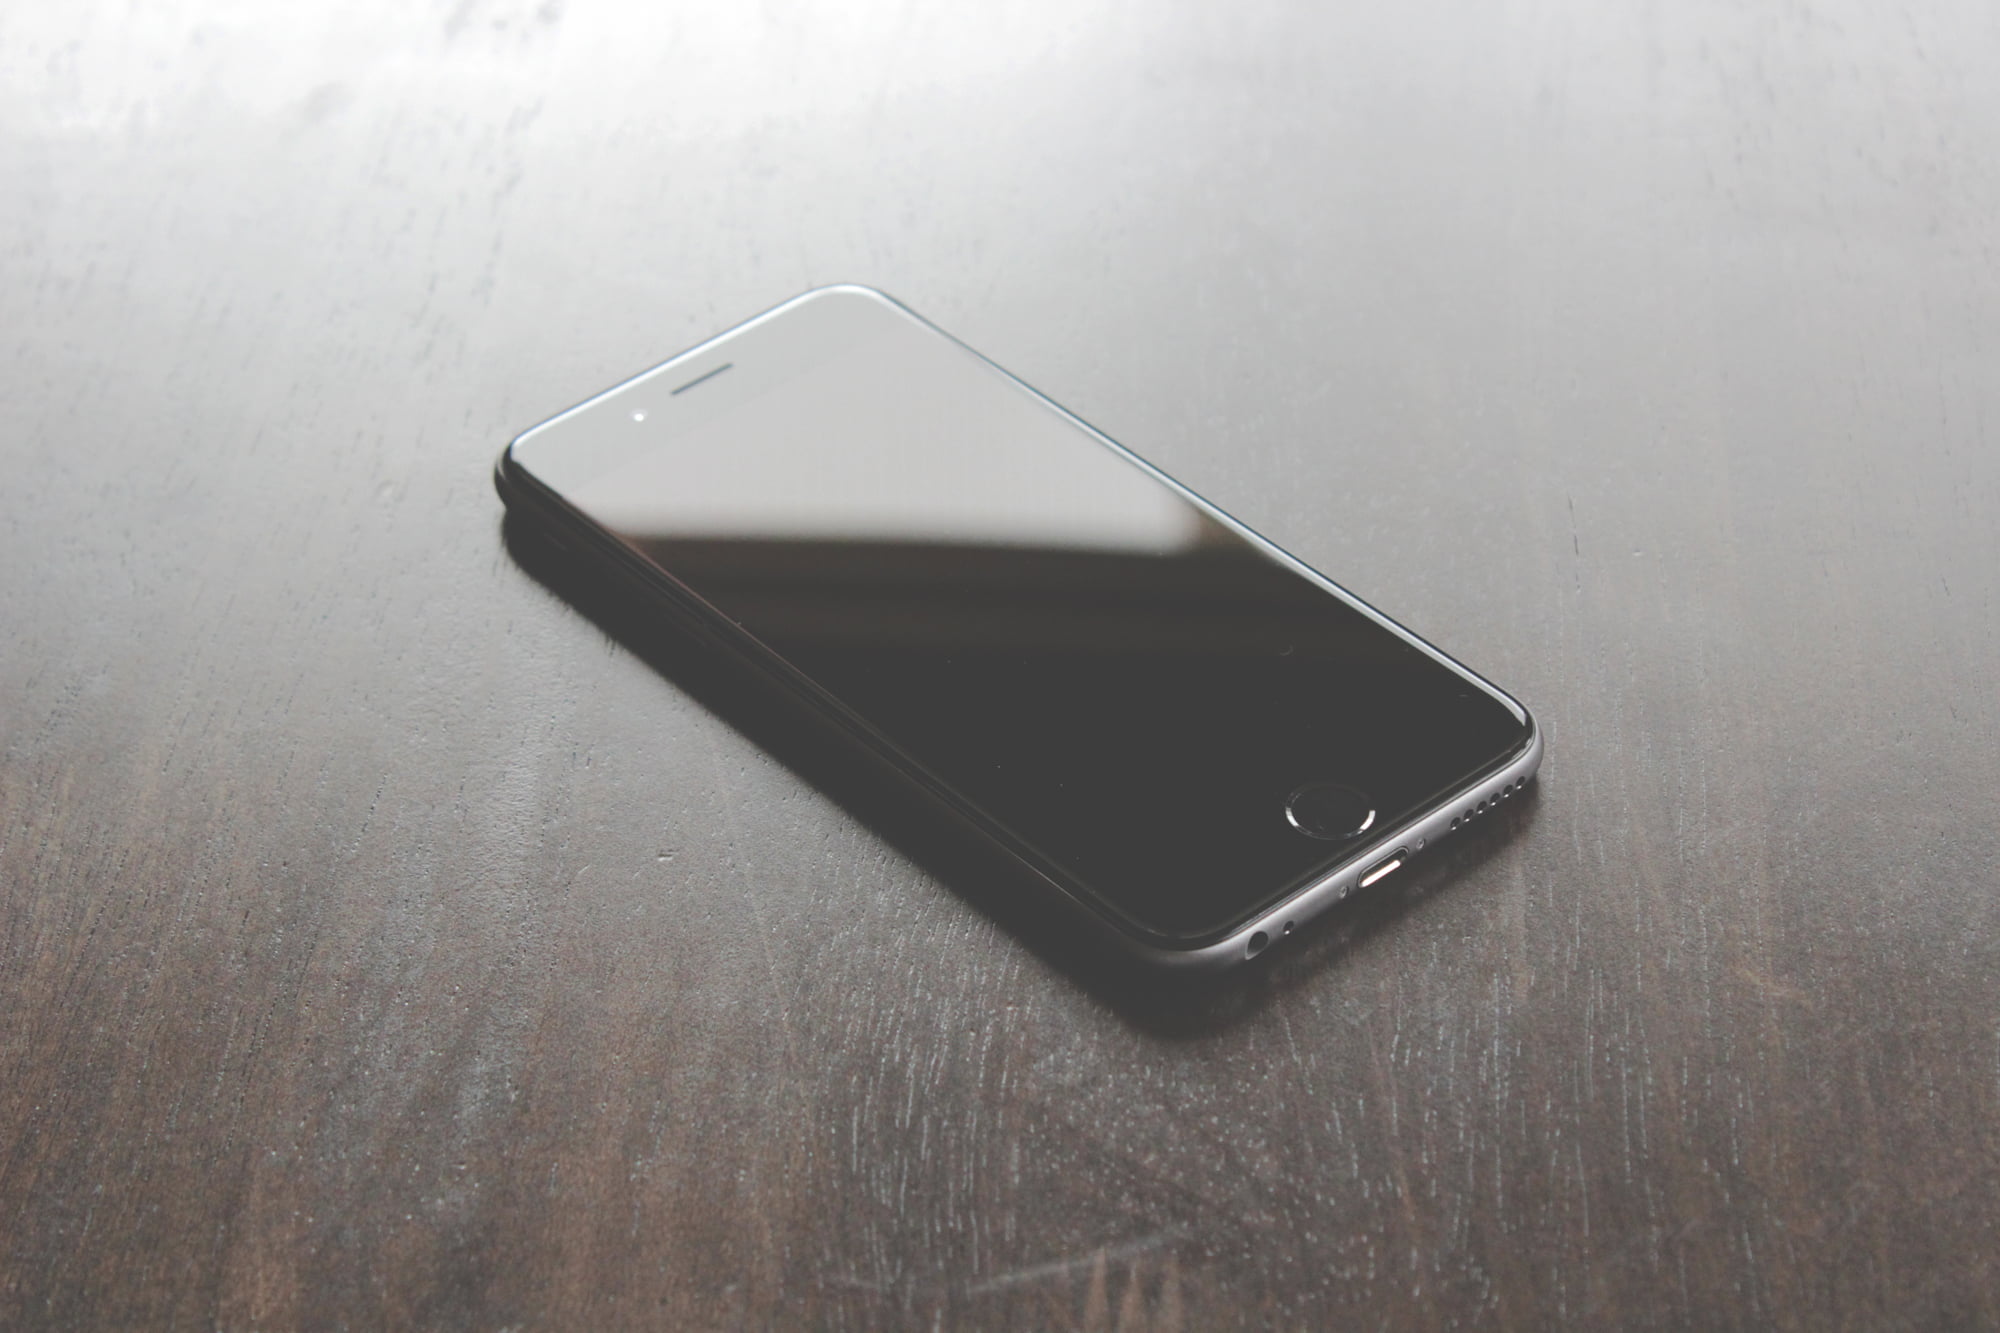 space gray iPhone 6 on top of a table, mobile Phone, smart Phone